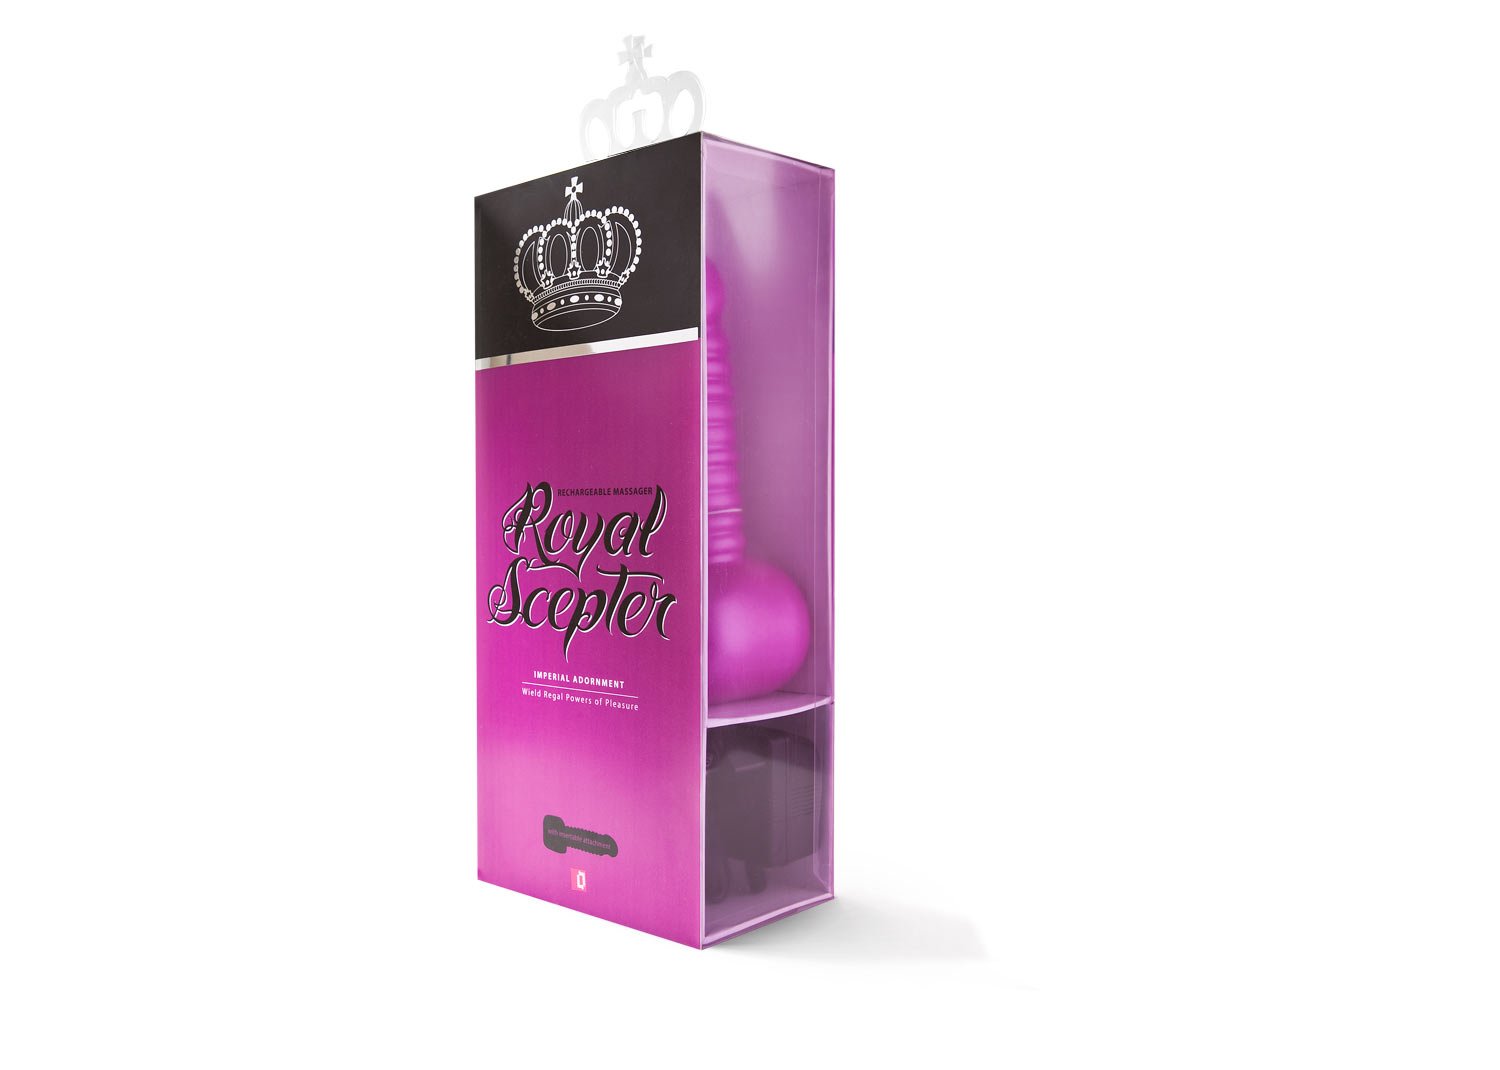 TOPCO Royal Scepter Rechargeable Massager, Imperial Adornment, 1er Pack (1 x 1 Stück)